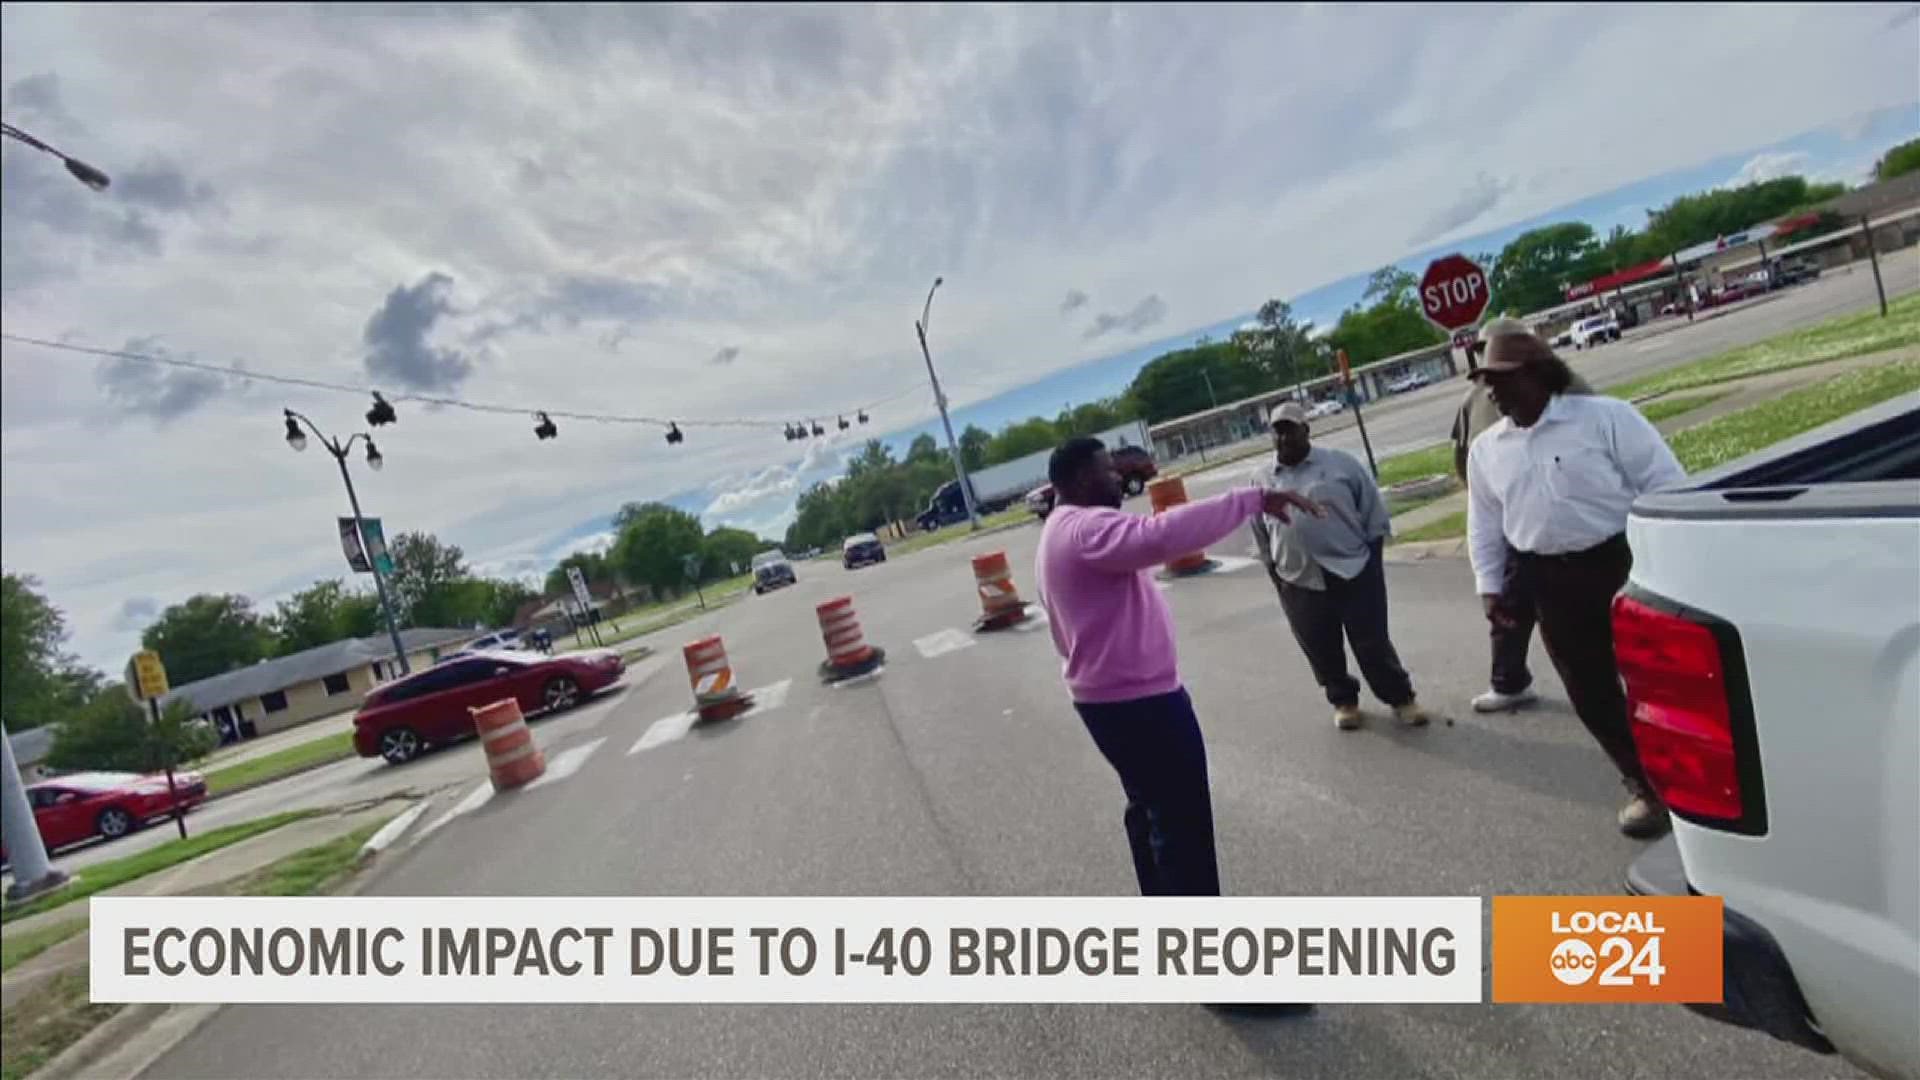 West Memphis leaders are celebrating the reopening of the I-40 bridge, but the impact of its closure is still being felt.